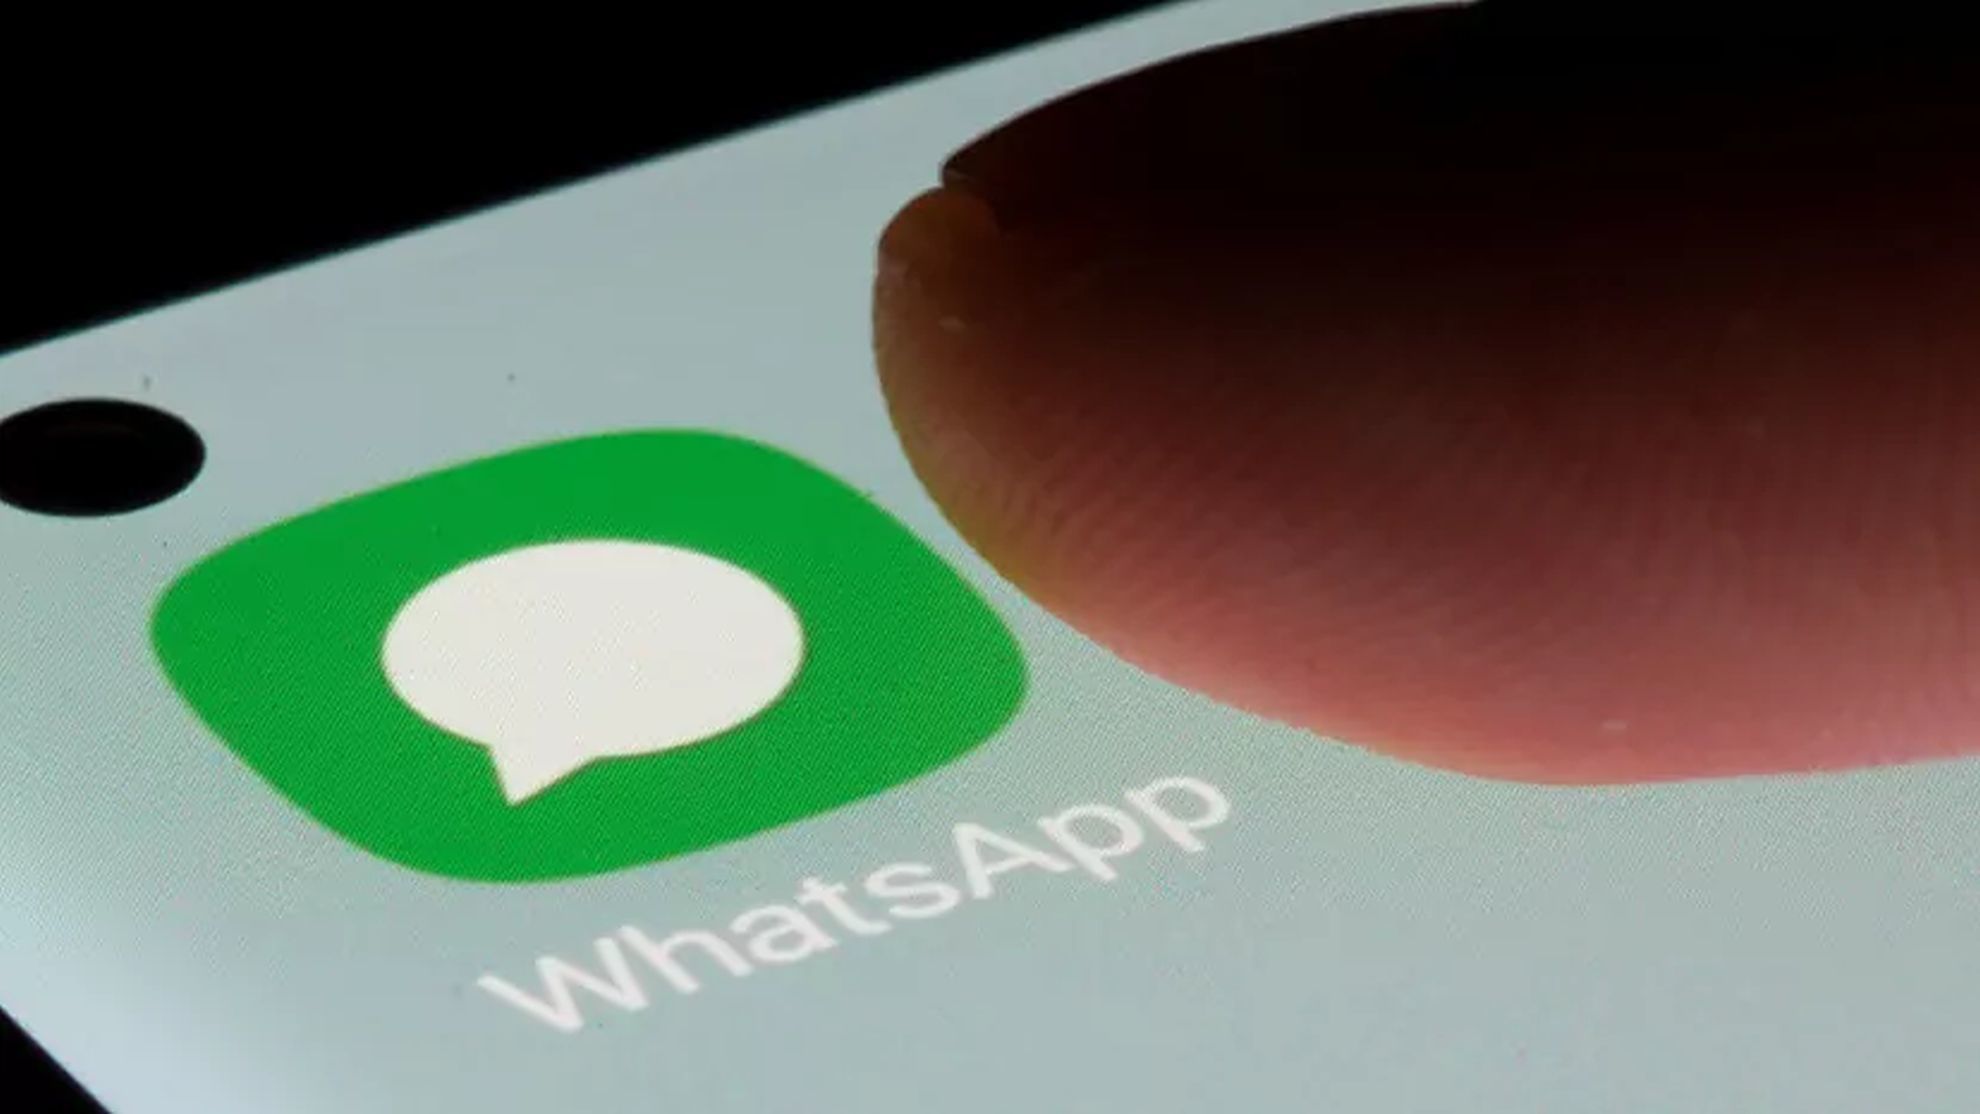 How to send the same message to multiple contacts on WhatsApp